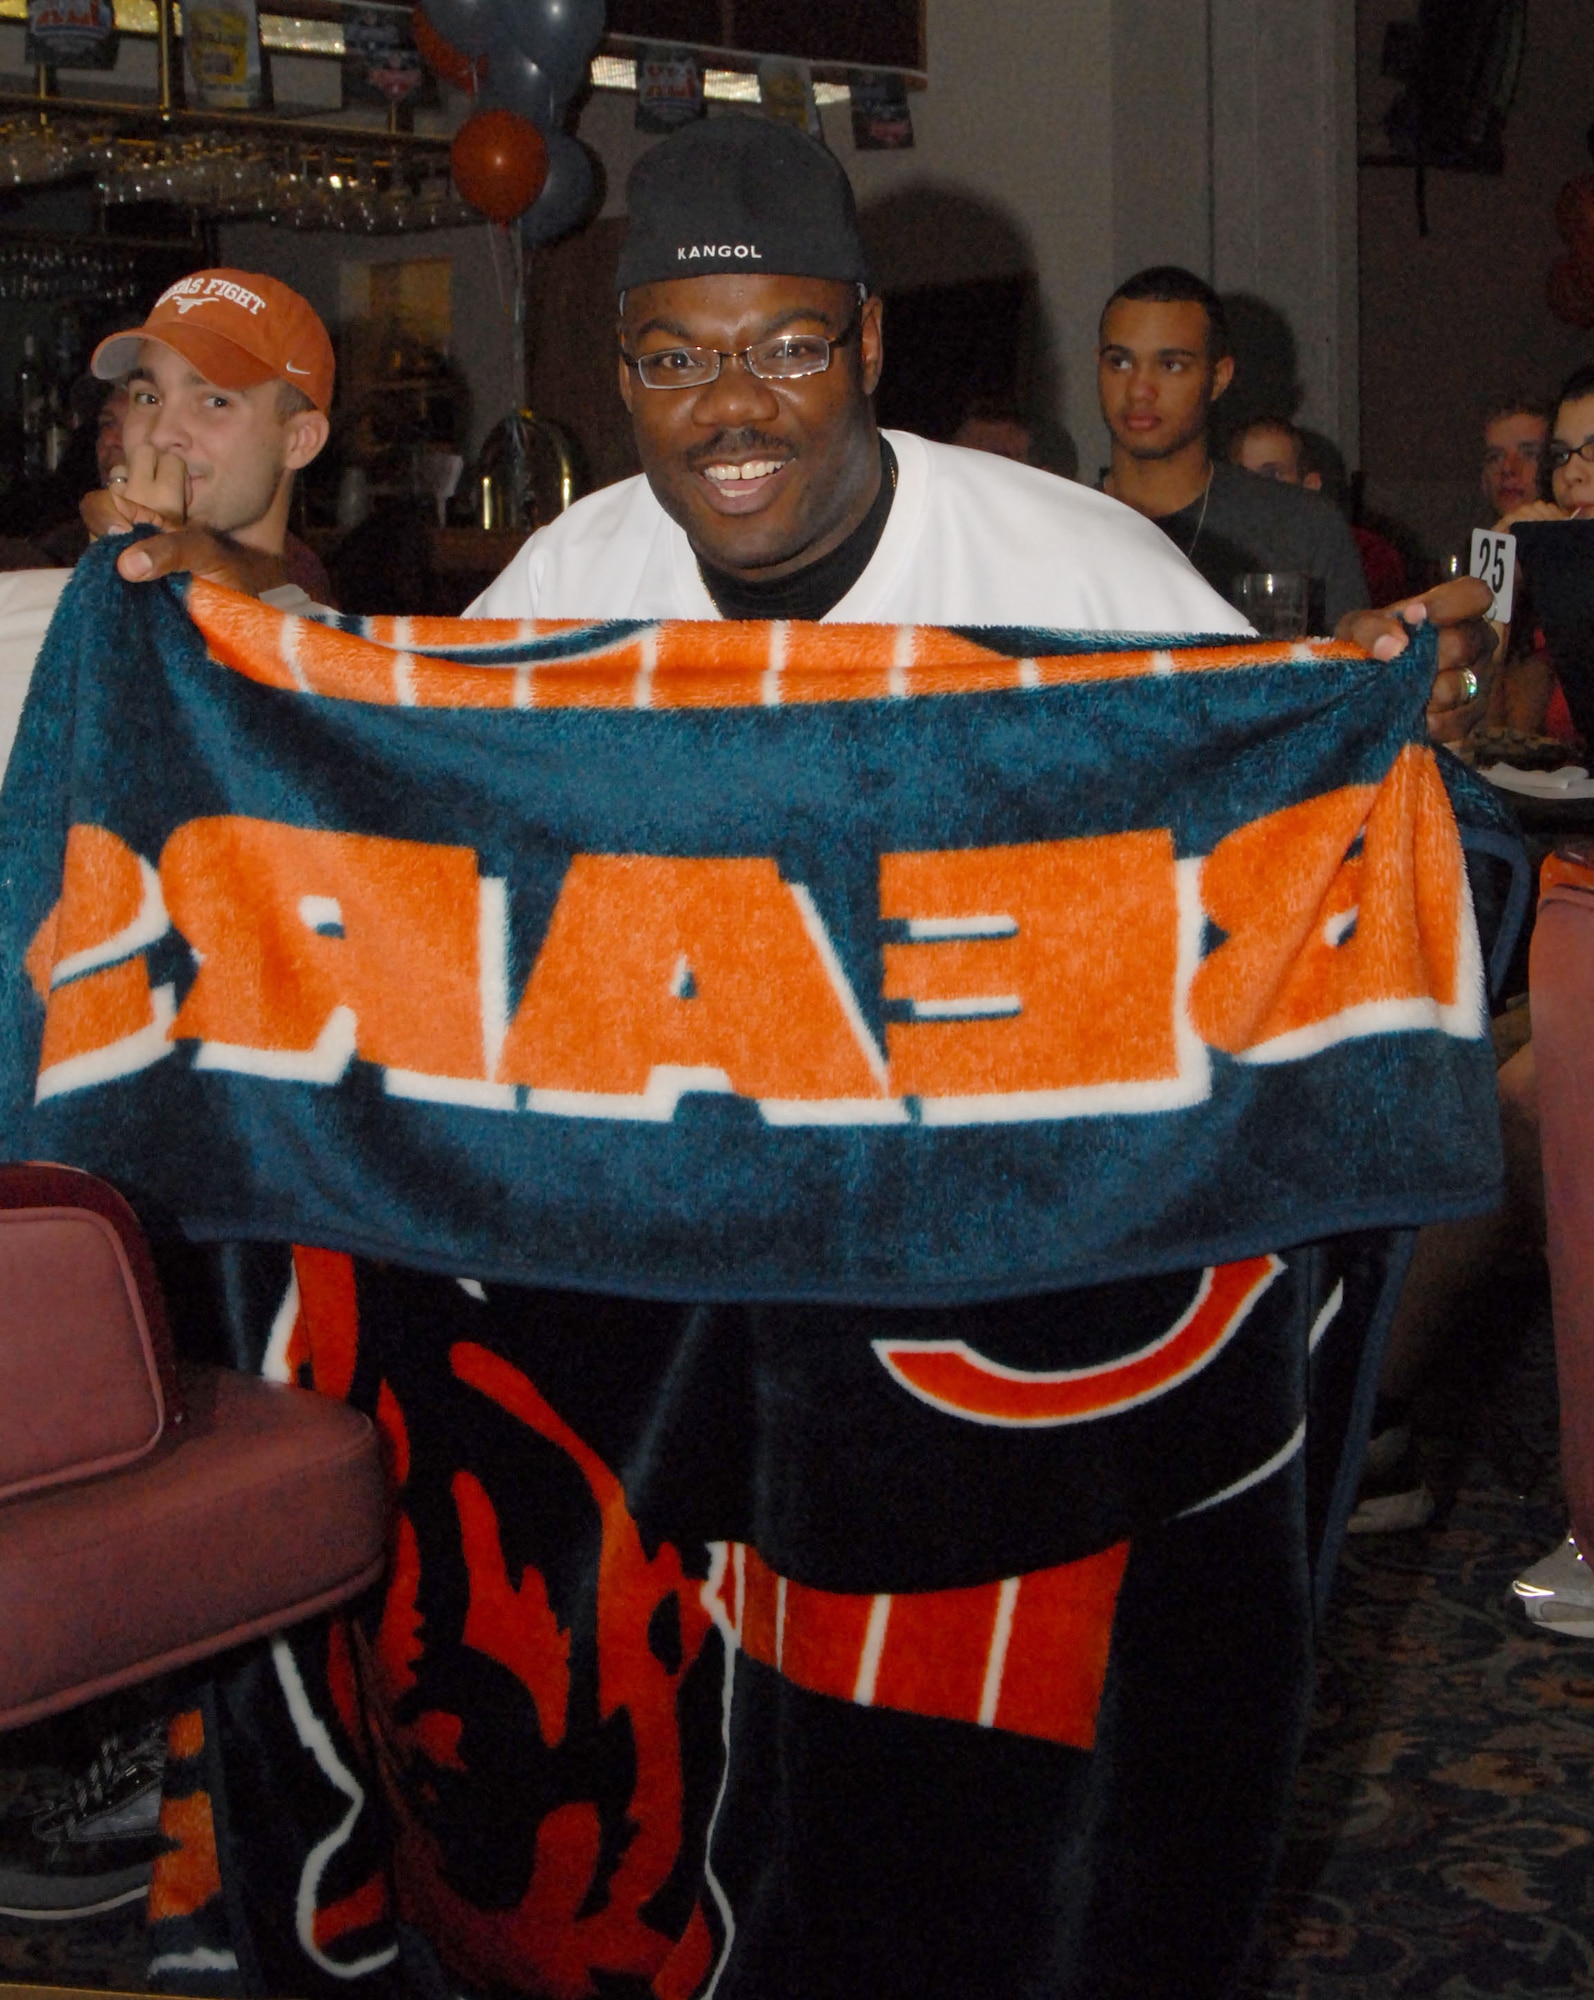 Master Sgt. Reginald Booker, a member of the 82nd Training Wing, Sheppard Air Force Base, Texas, displays his loyalty to the Chicago Bears during the Super Bowl party. (U.S. Air Force photo by Airman 1st Class Luis Loza Gutierrez.)